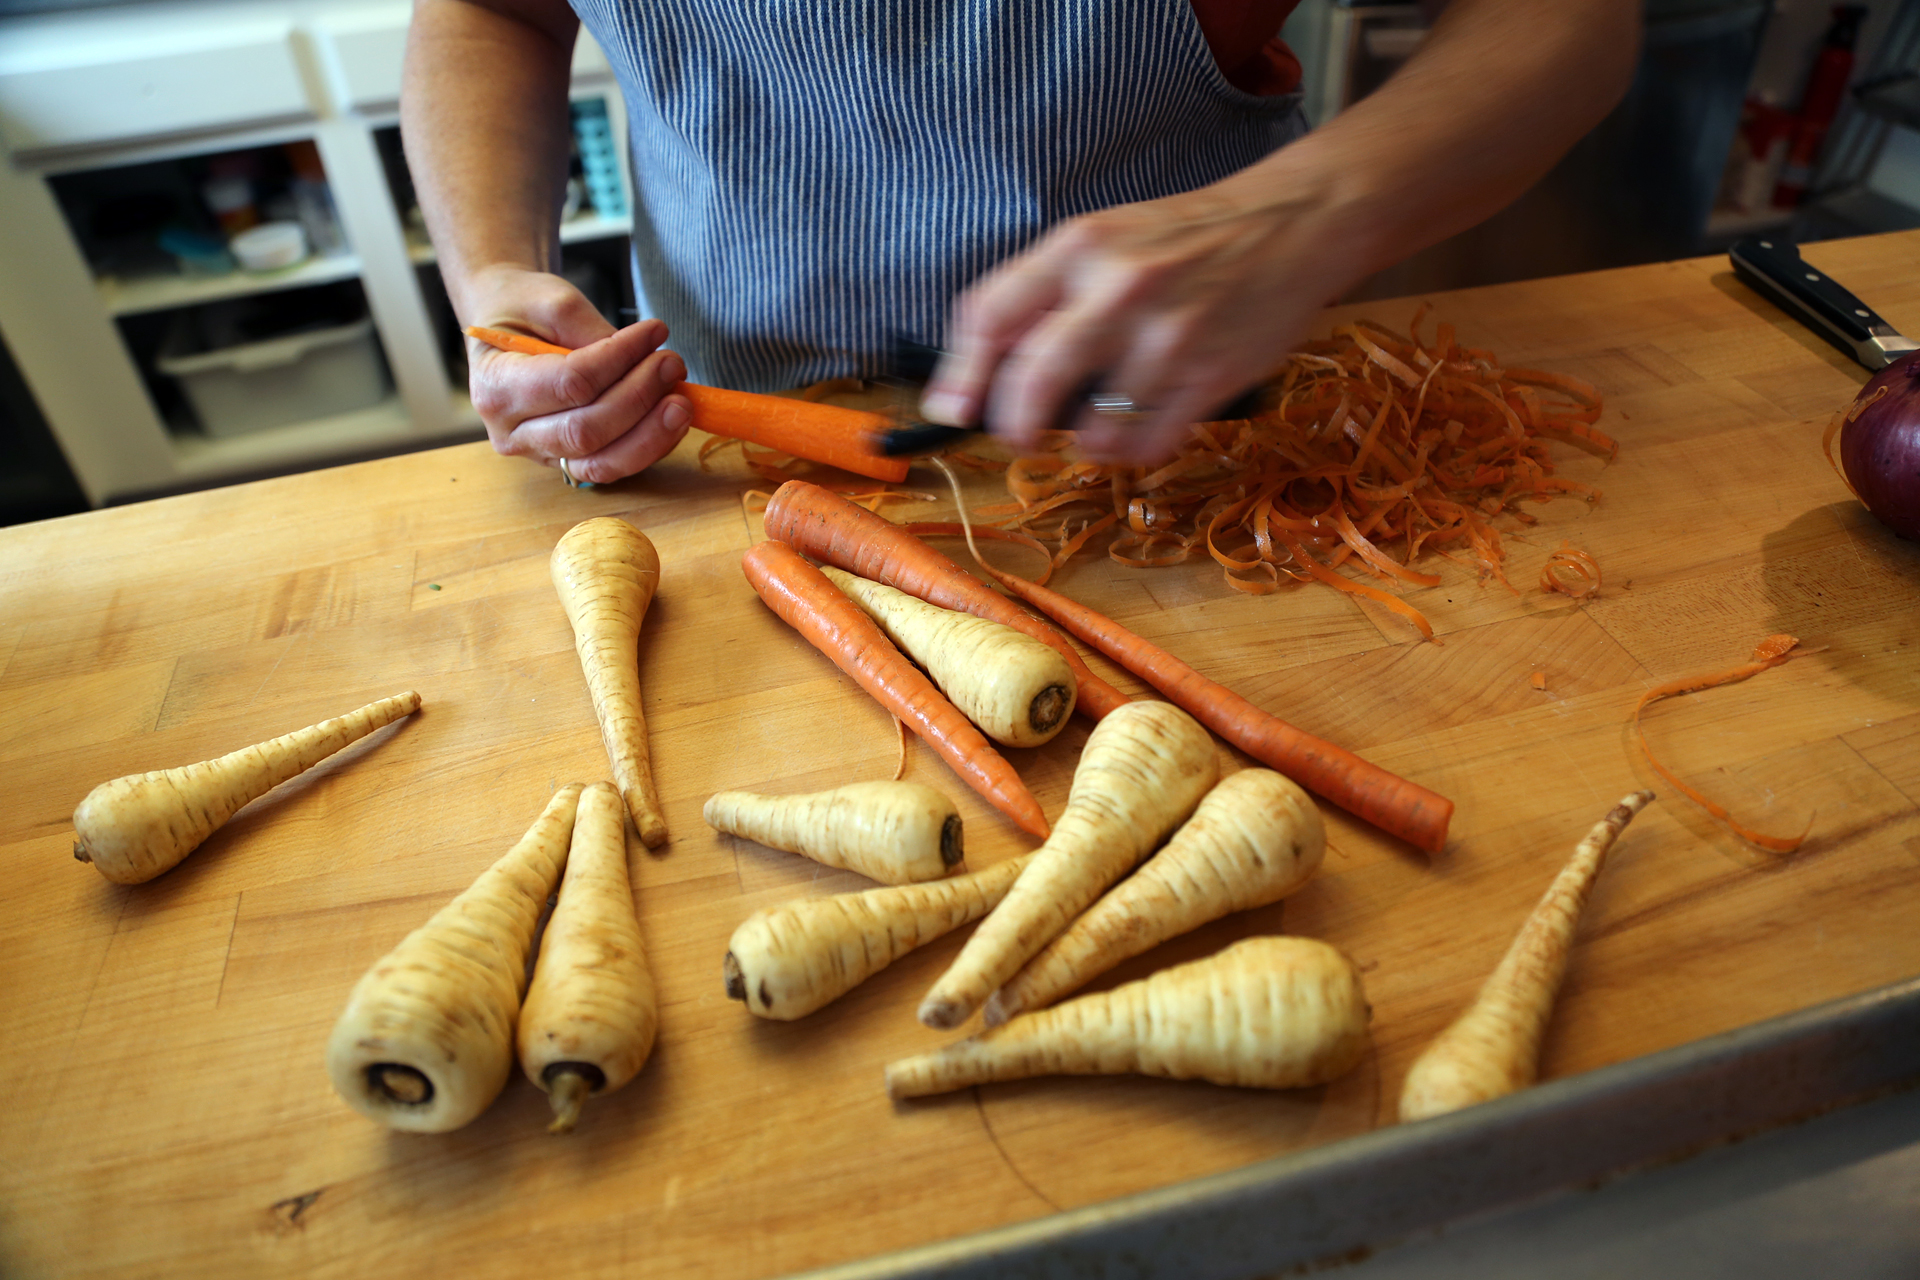 Trim and peel the carrots and parsnips.